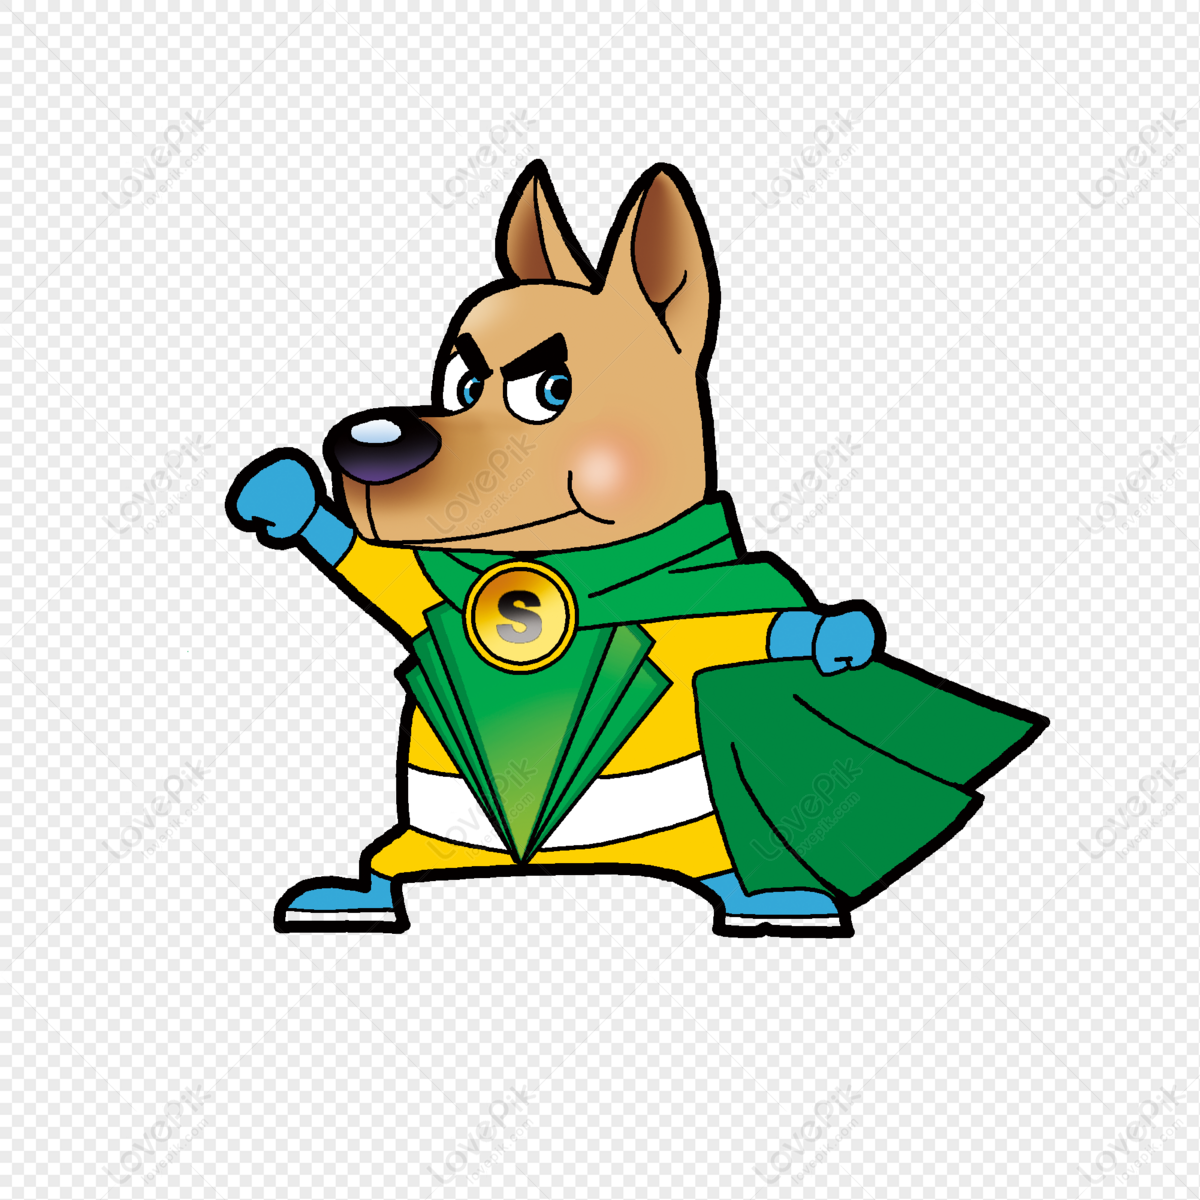 Superman Dog Image Free PNG And Clipart Image For Free Download - Lovepik |  401083249